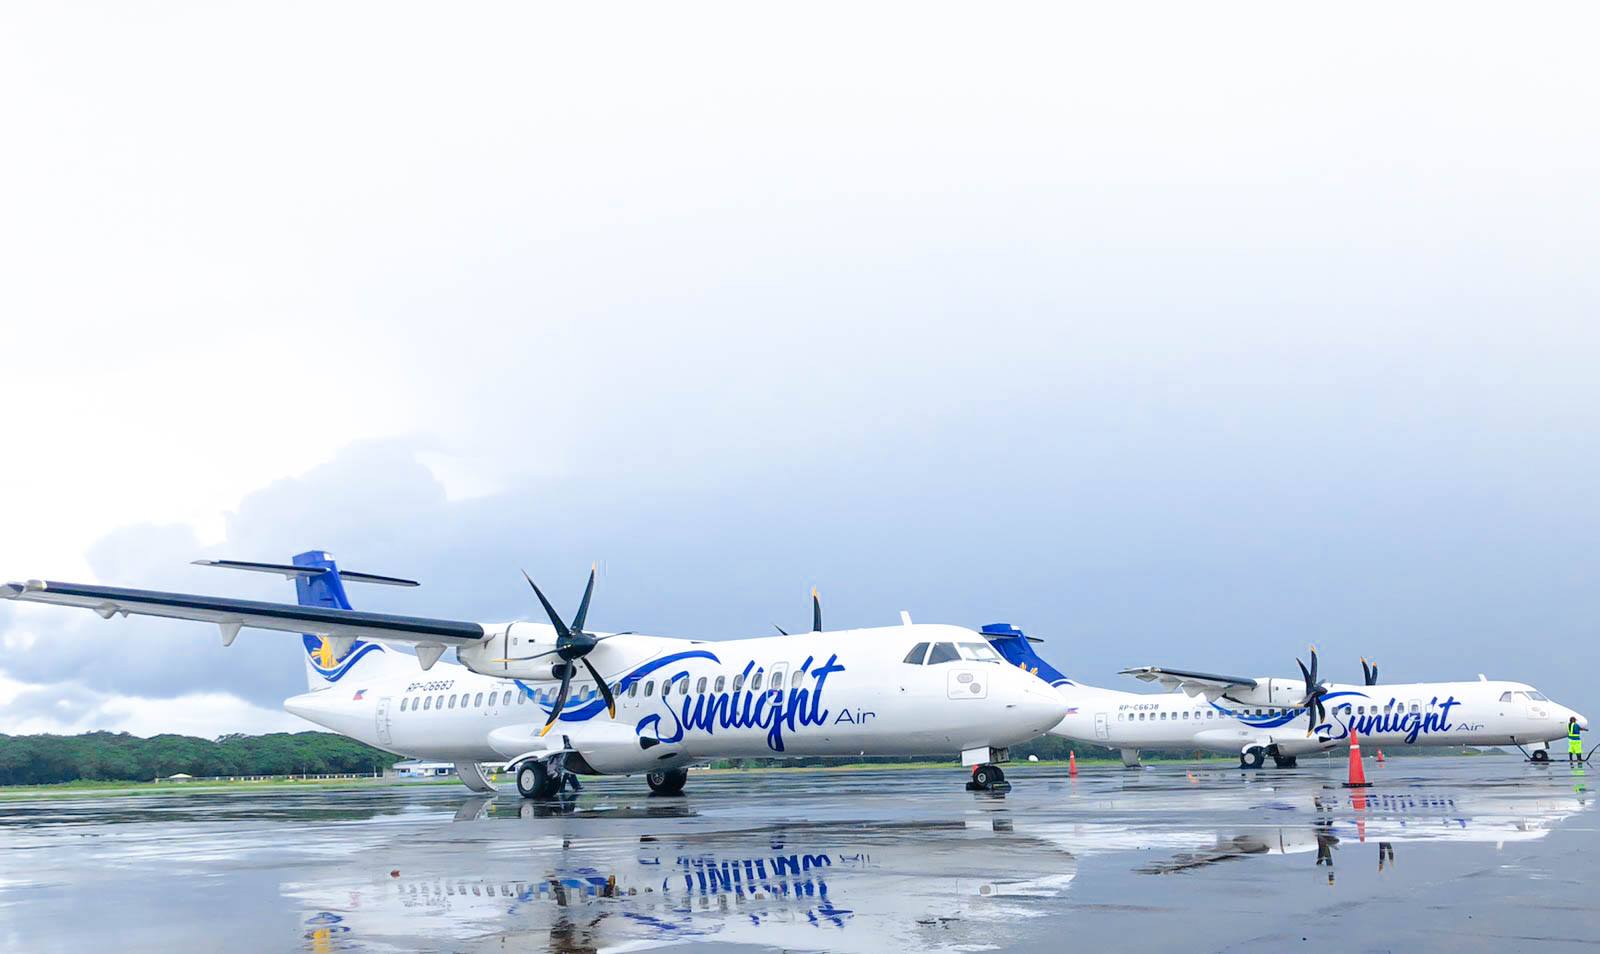 sunlight air • Sunlight Air is the newest player in PH domestic air travel